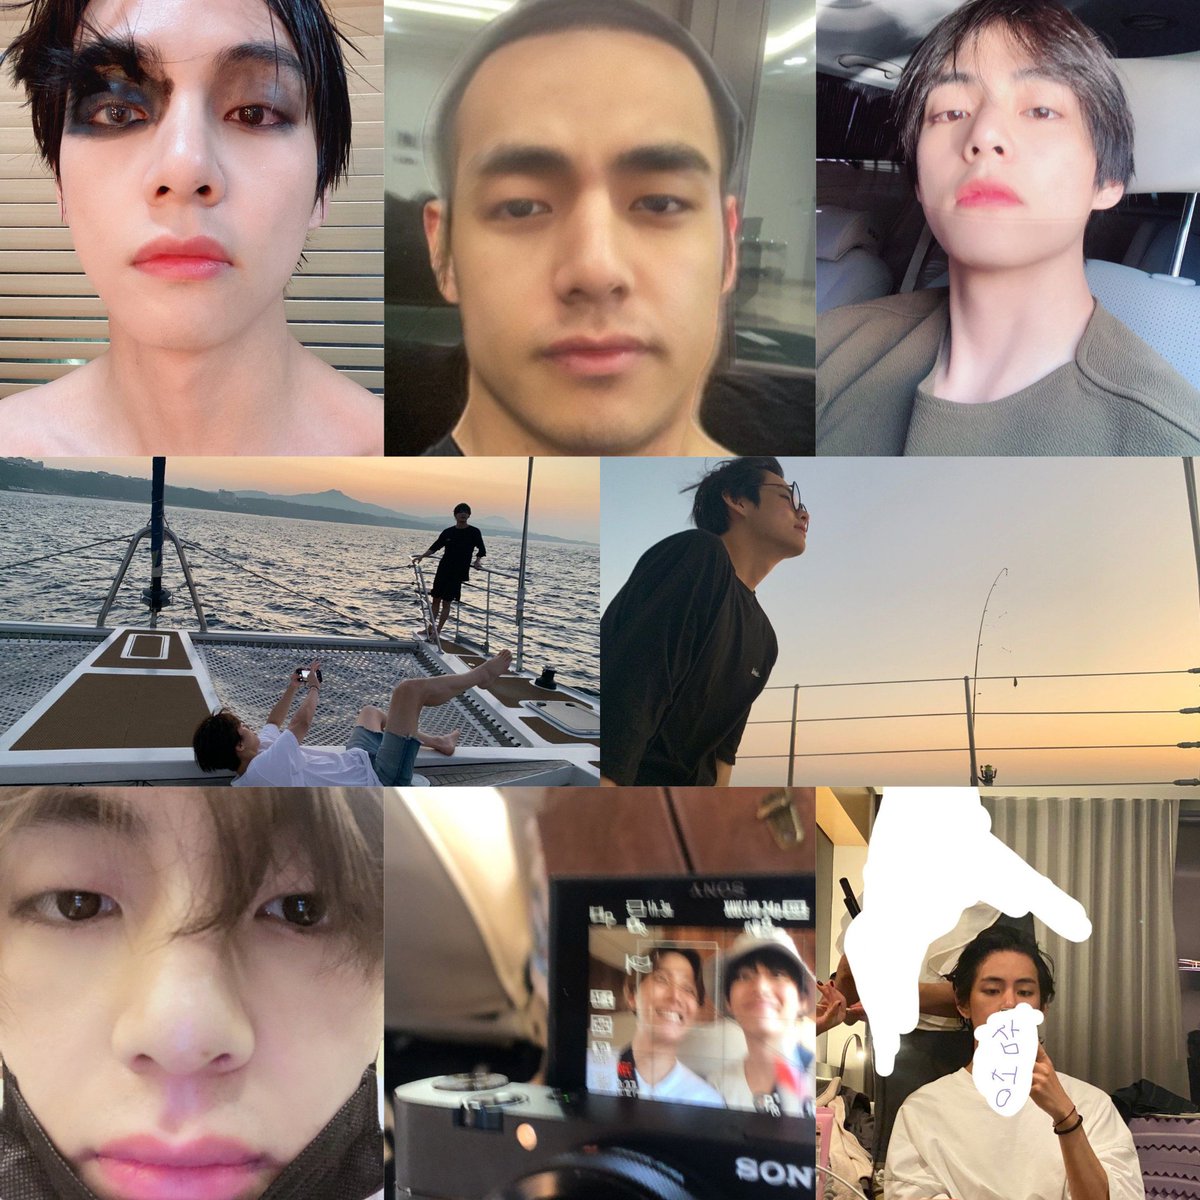 Taehyung posting these on weverse but deleting after